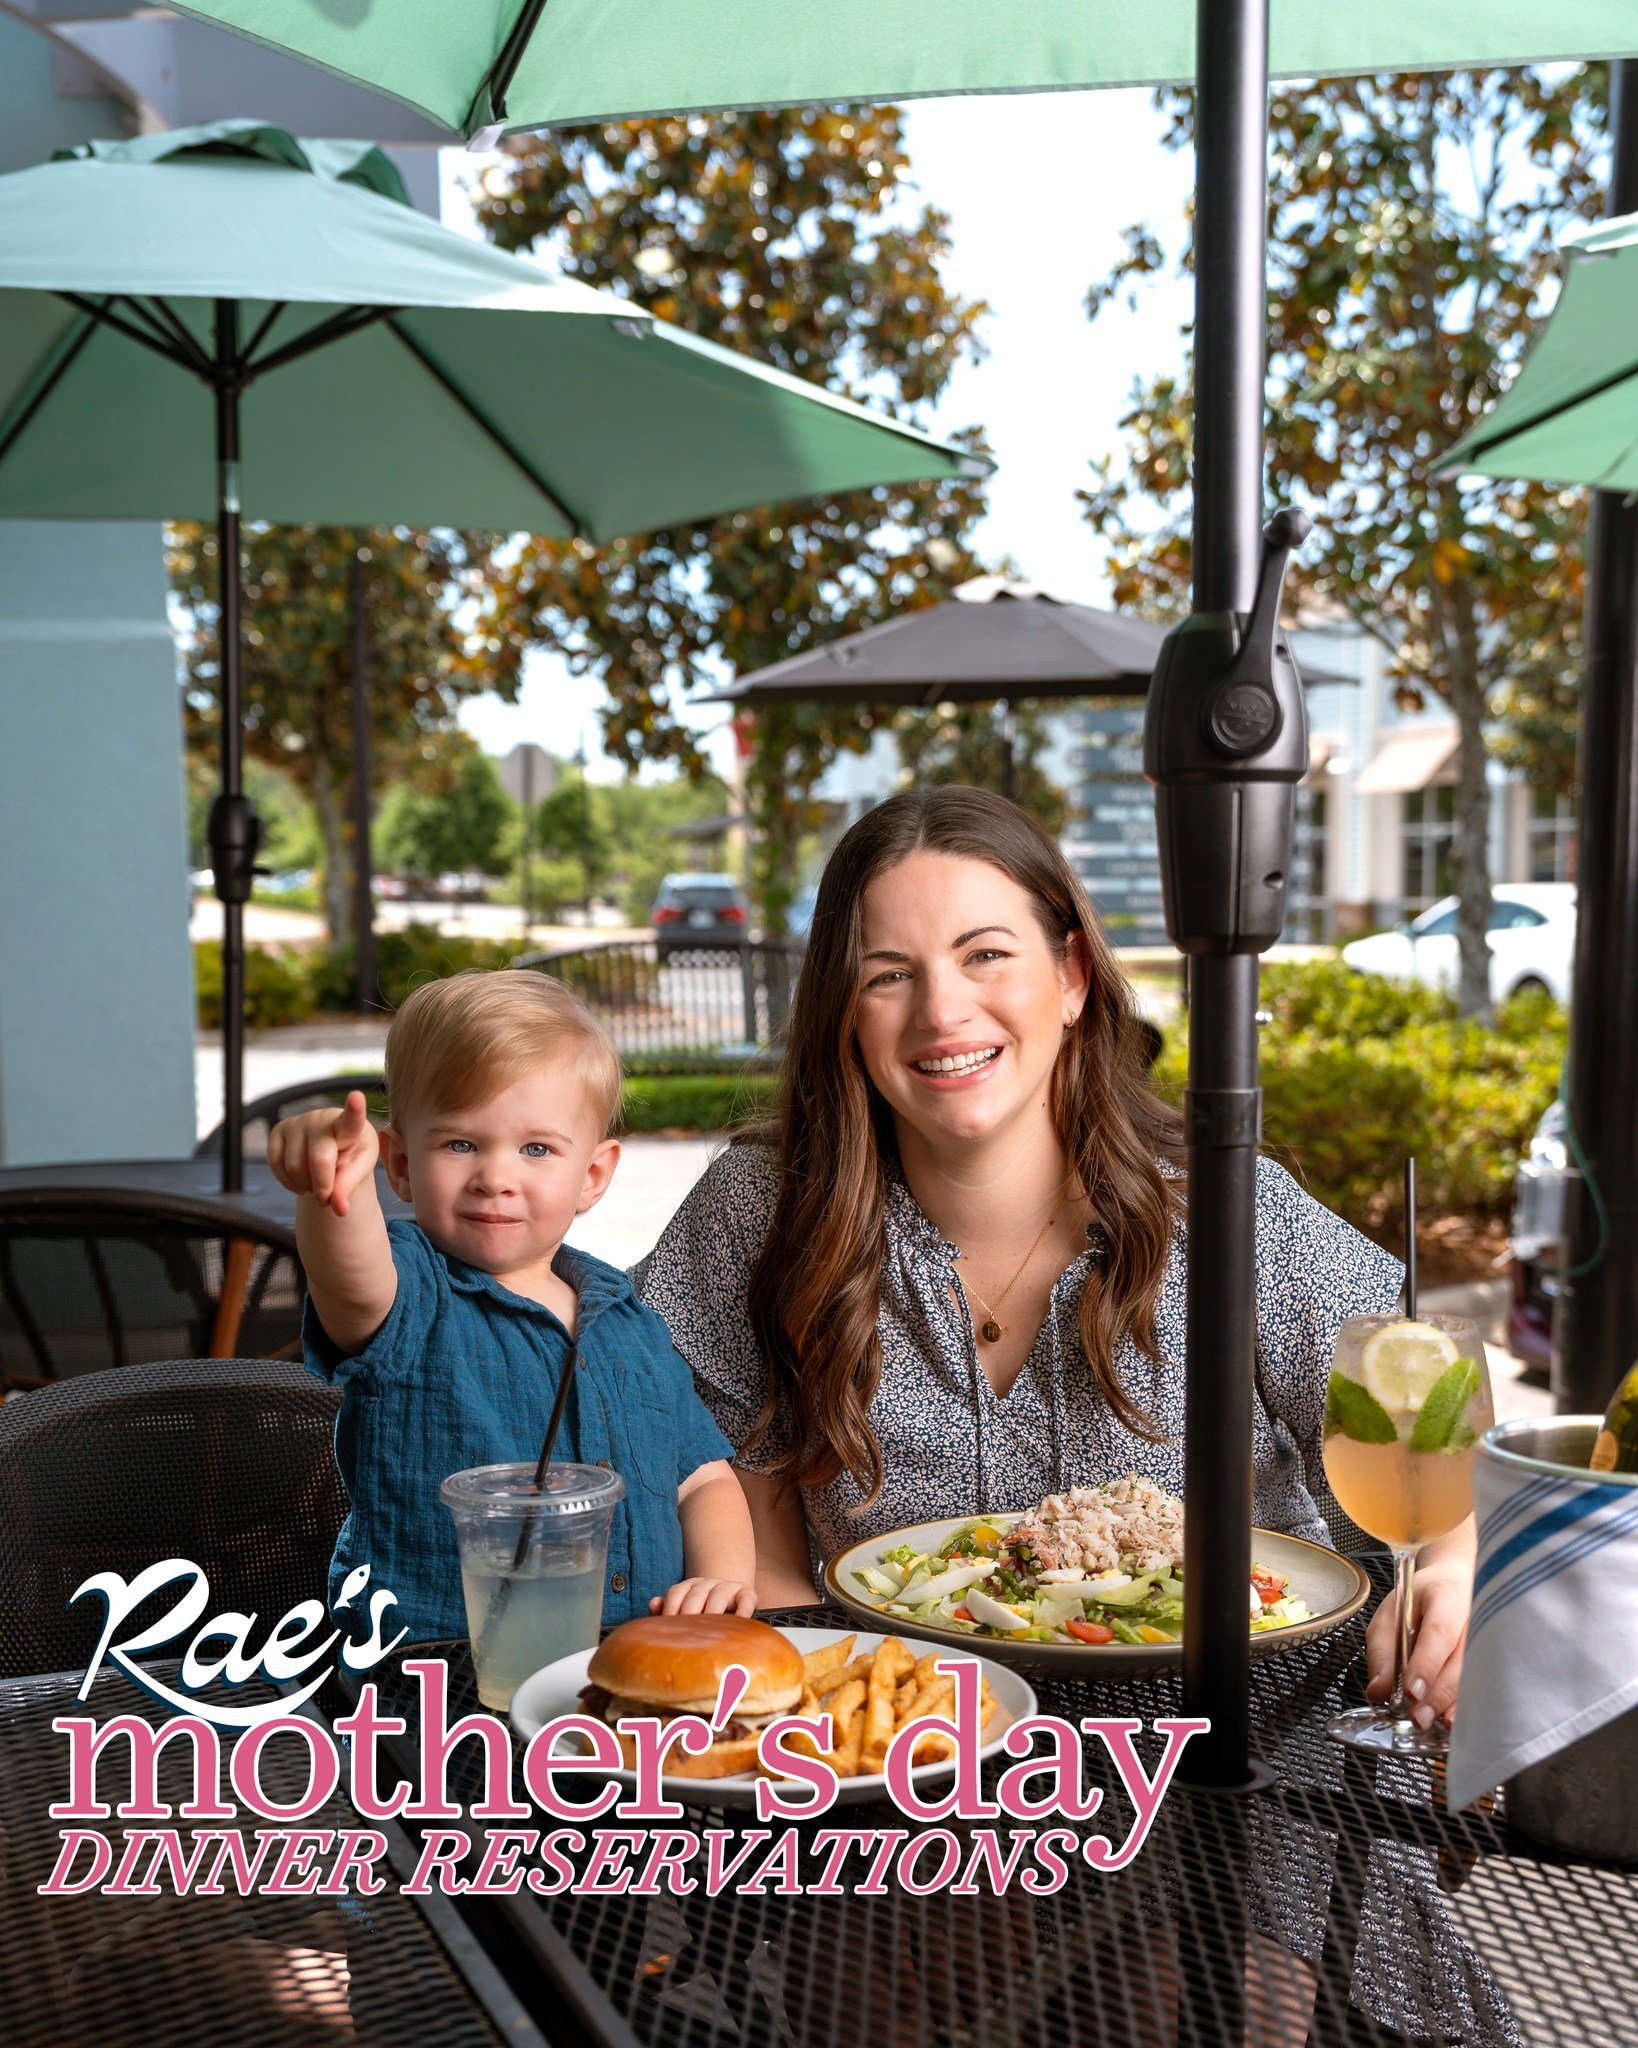 Treat Mom to a dinner reservation at Rae's! Reservations are available from 3pm to 10pm for her favorite dishes, cocktails, and good times on the Northside. 

To make the holiday extra special, our bartenders have come up with three delicious seasona